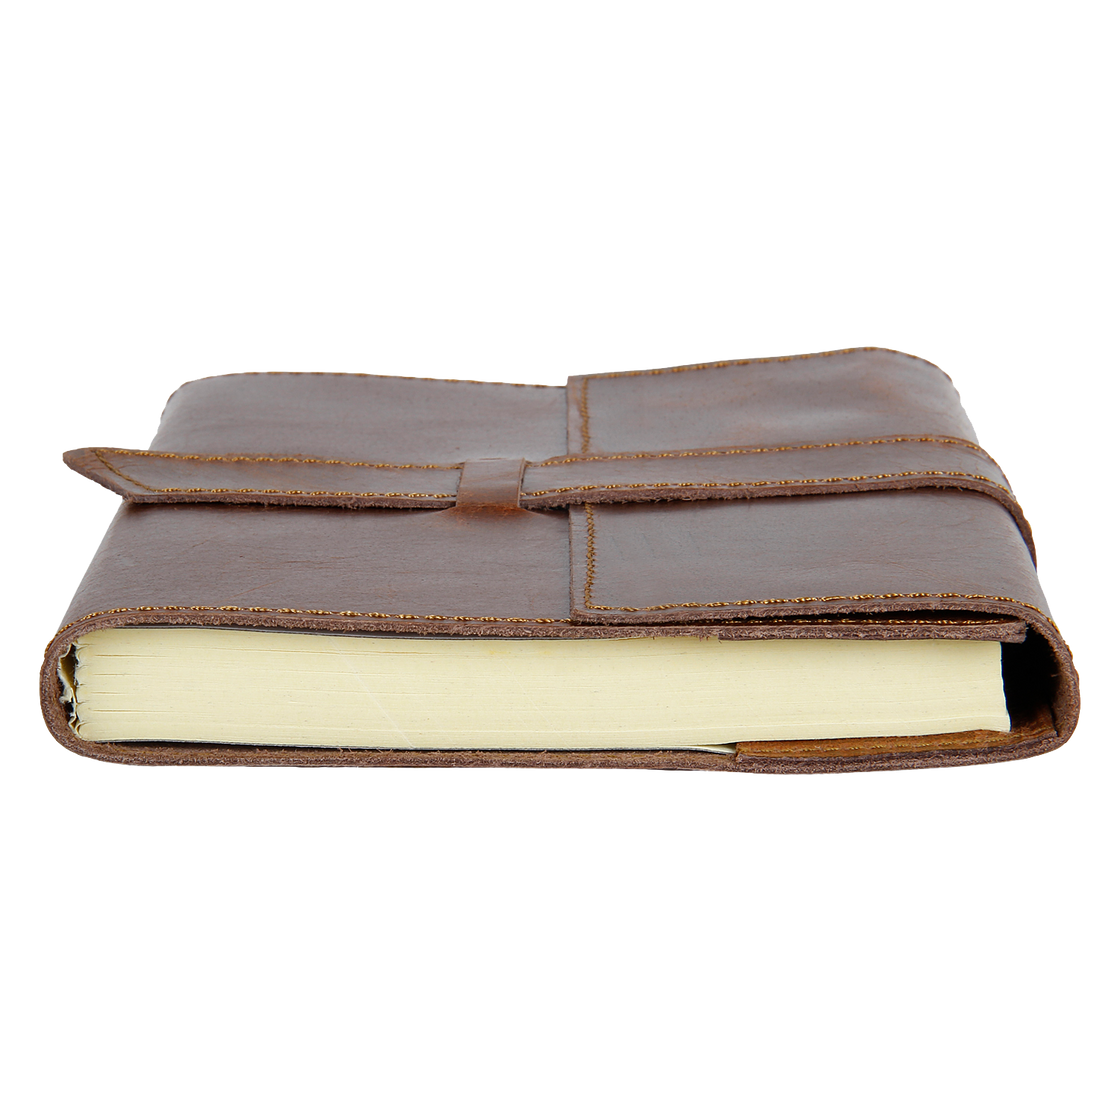 Leather Refillable Journal Notebook